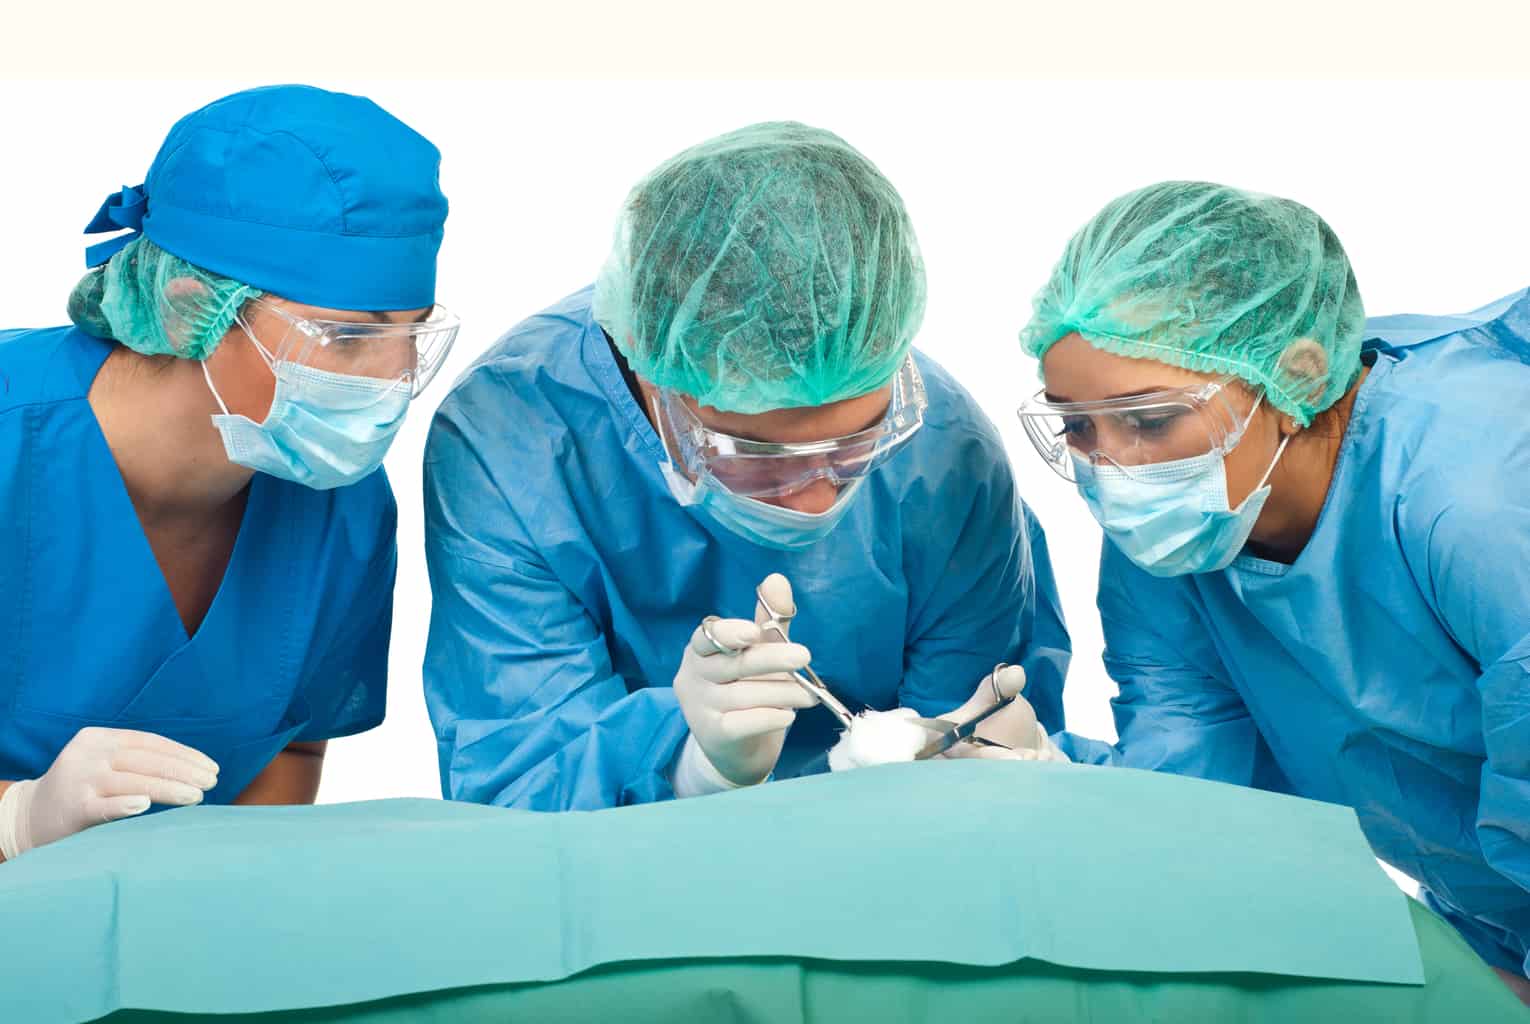 Pointless surgery - but 210,000 men are being duped (per year)